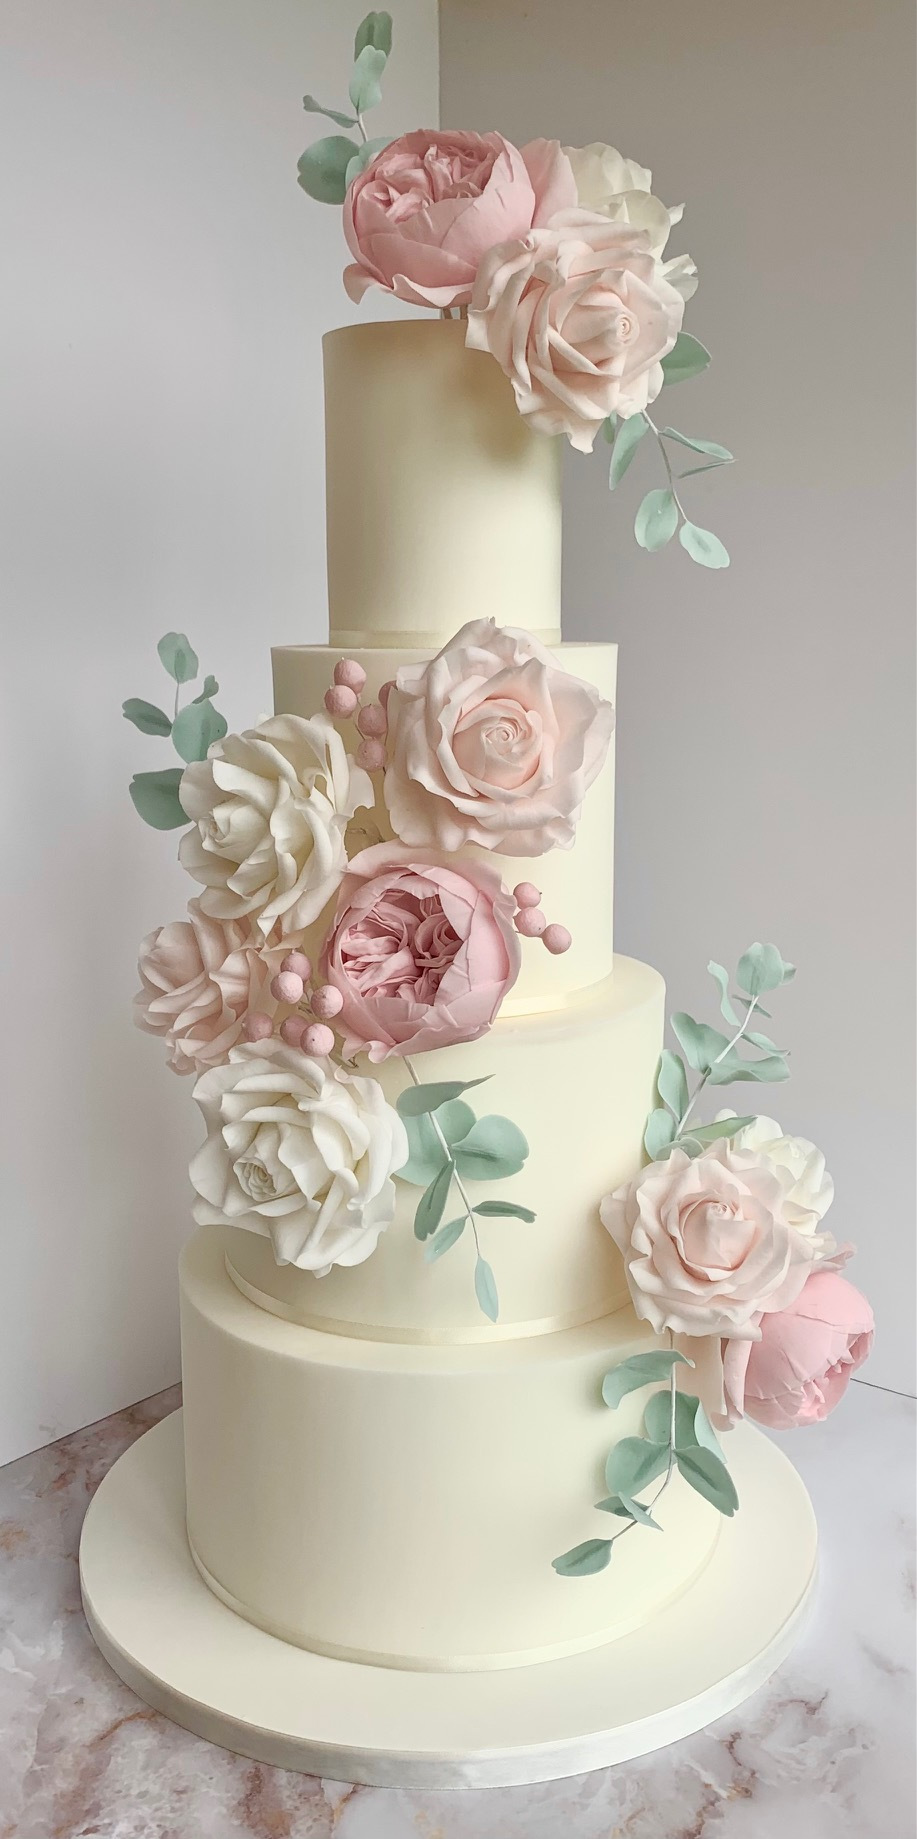 4 tiered wedding cake with a pale pink color scheme of sugar flowers